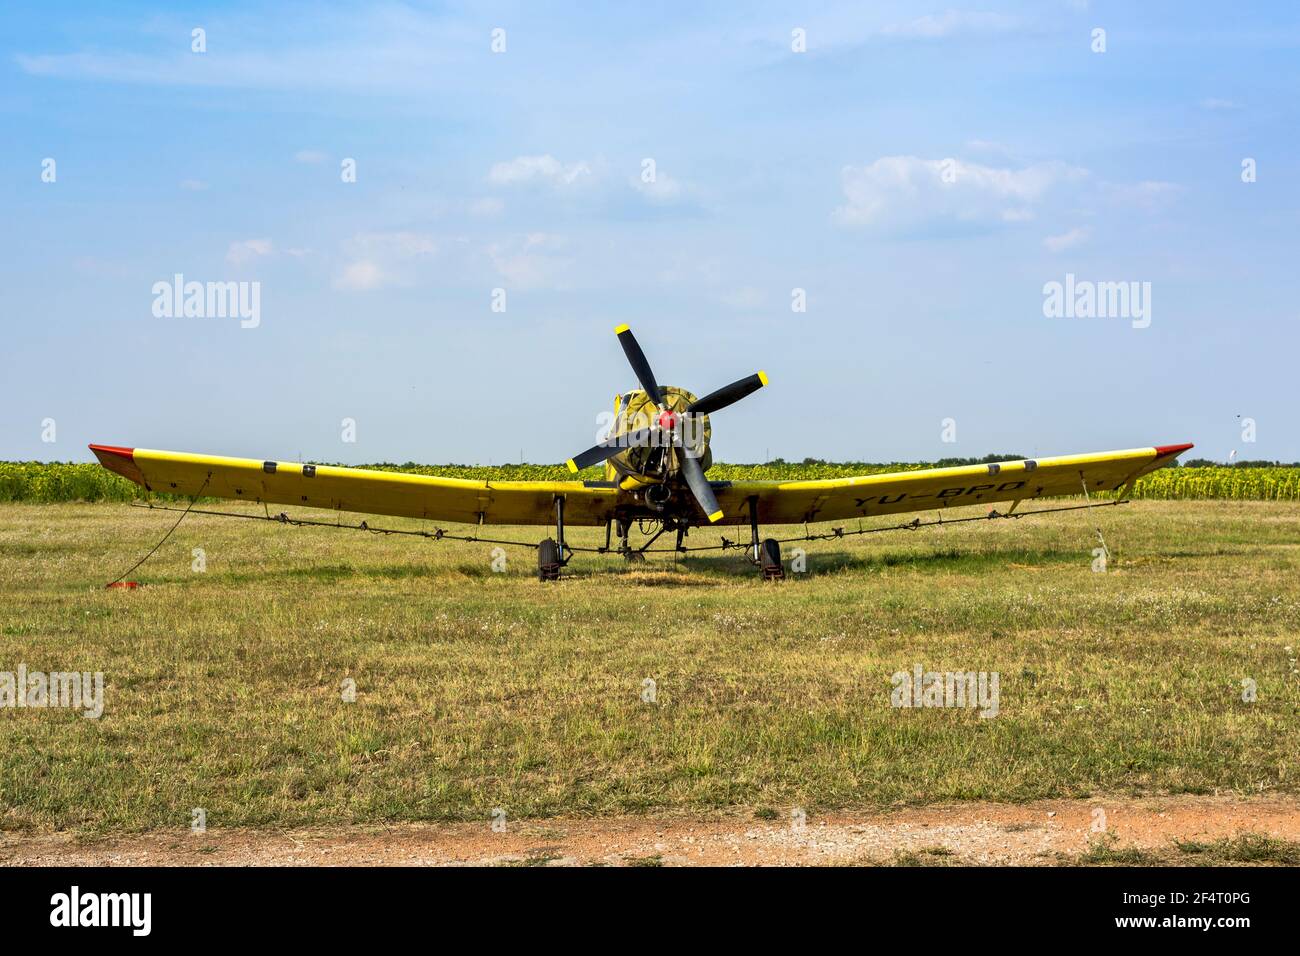 Zrenjanin, Ecka, Serbia, August 04,2015.Old airport and an old plane that occasionally flies for tourist, school or agricultural needs. Stock Photo